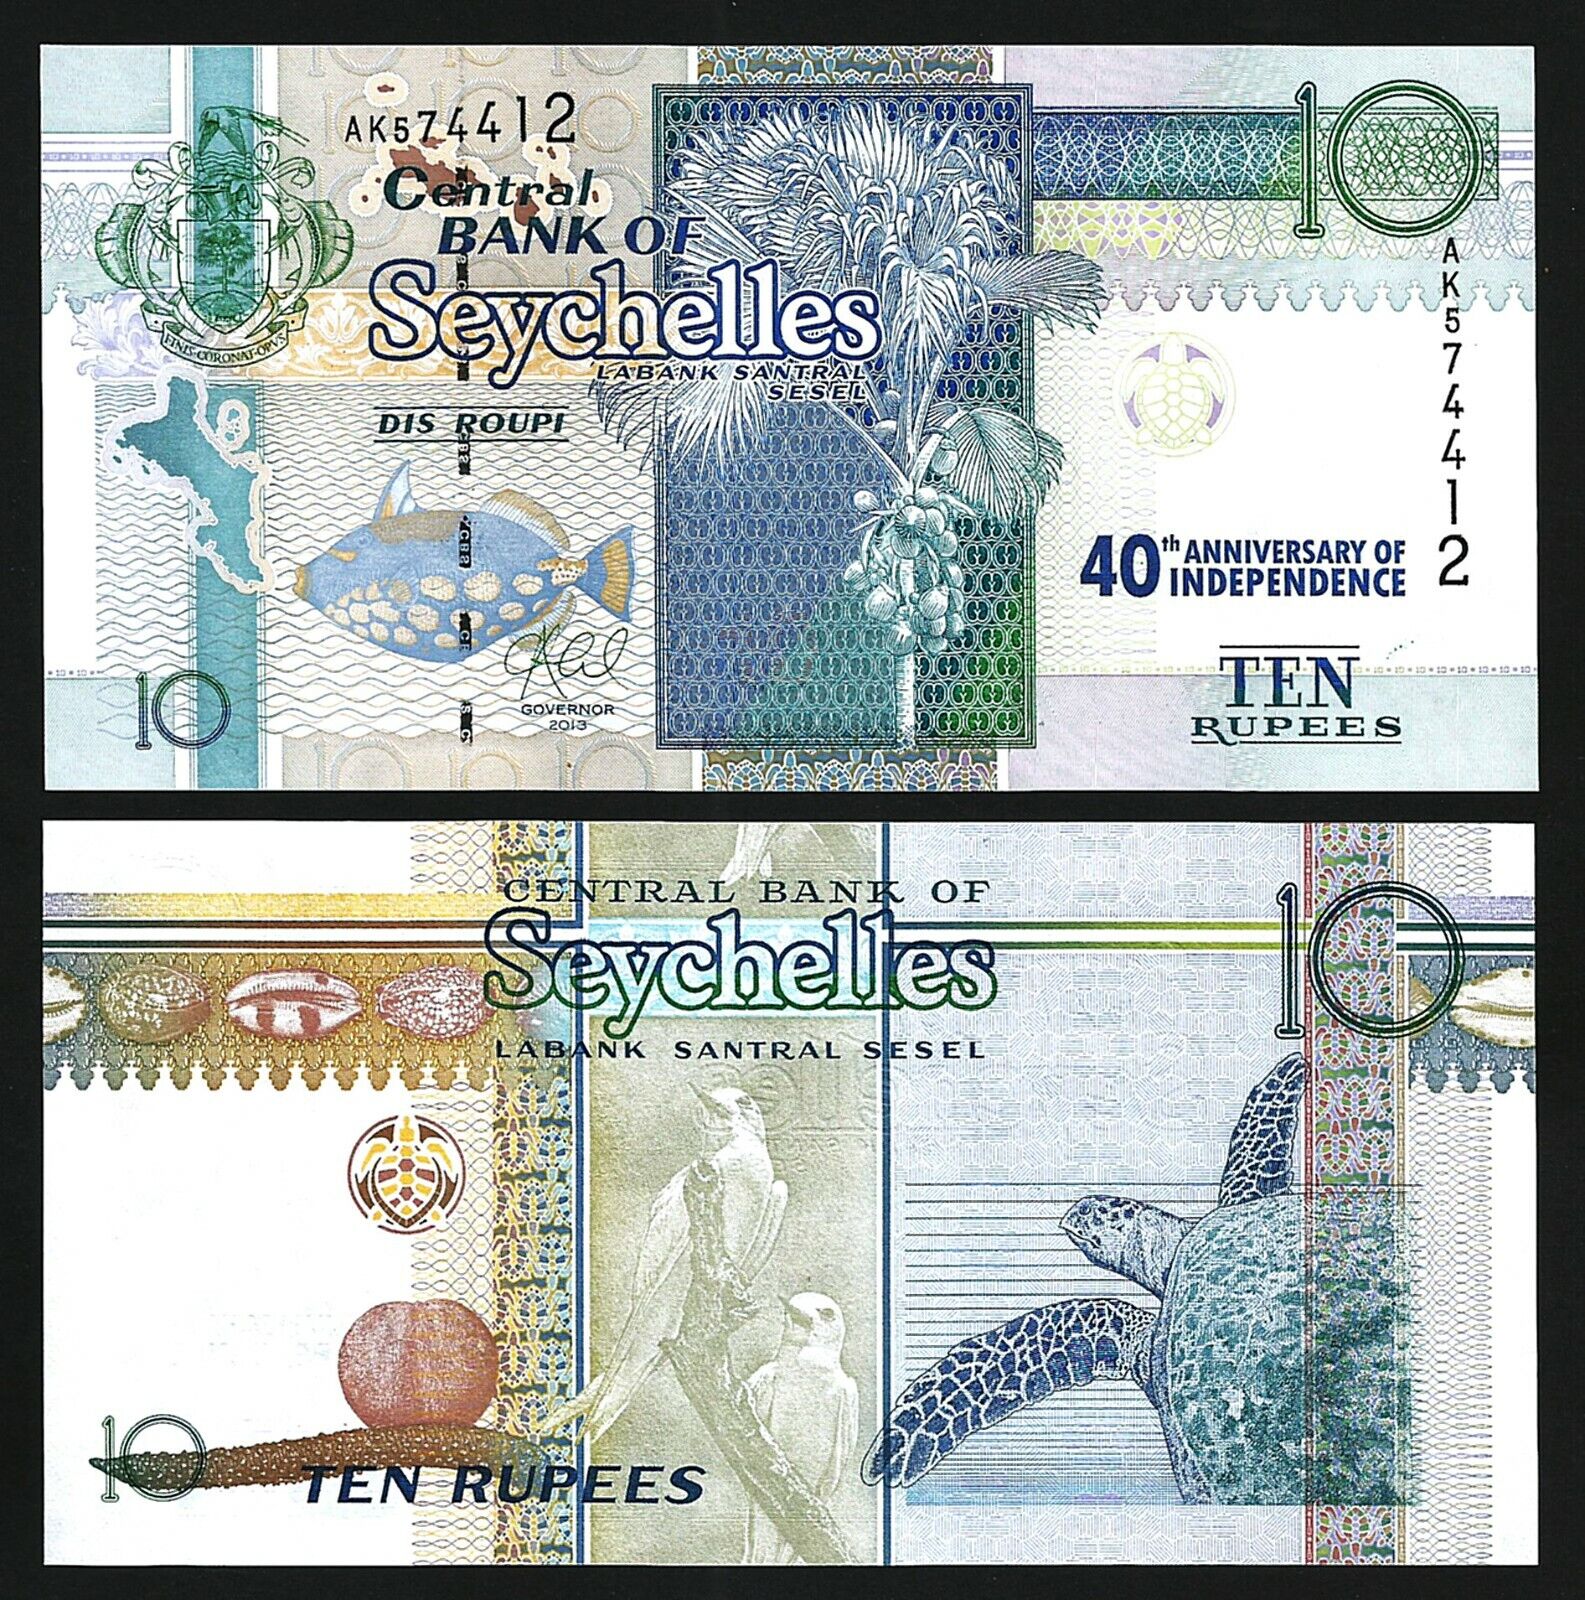 Seychelles 10 Rupees 2013, Unc P-54, Commemorative 40th Anniversary Independence